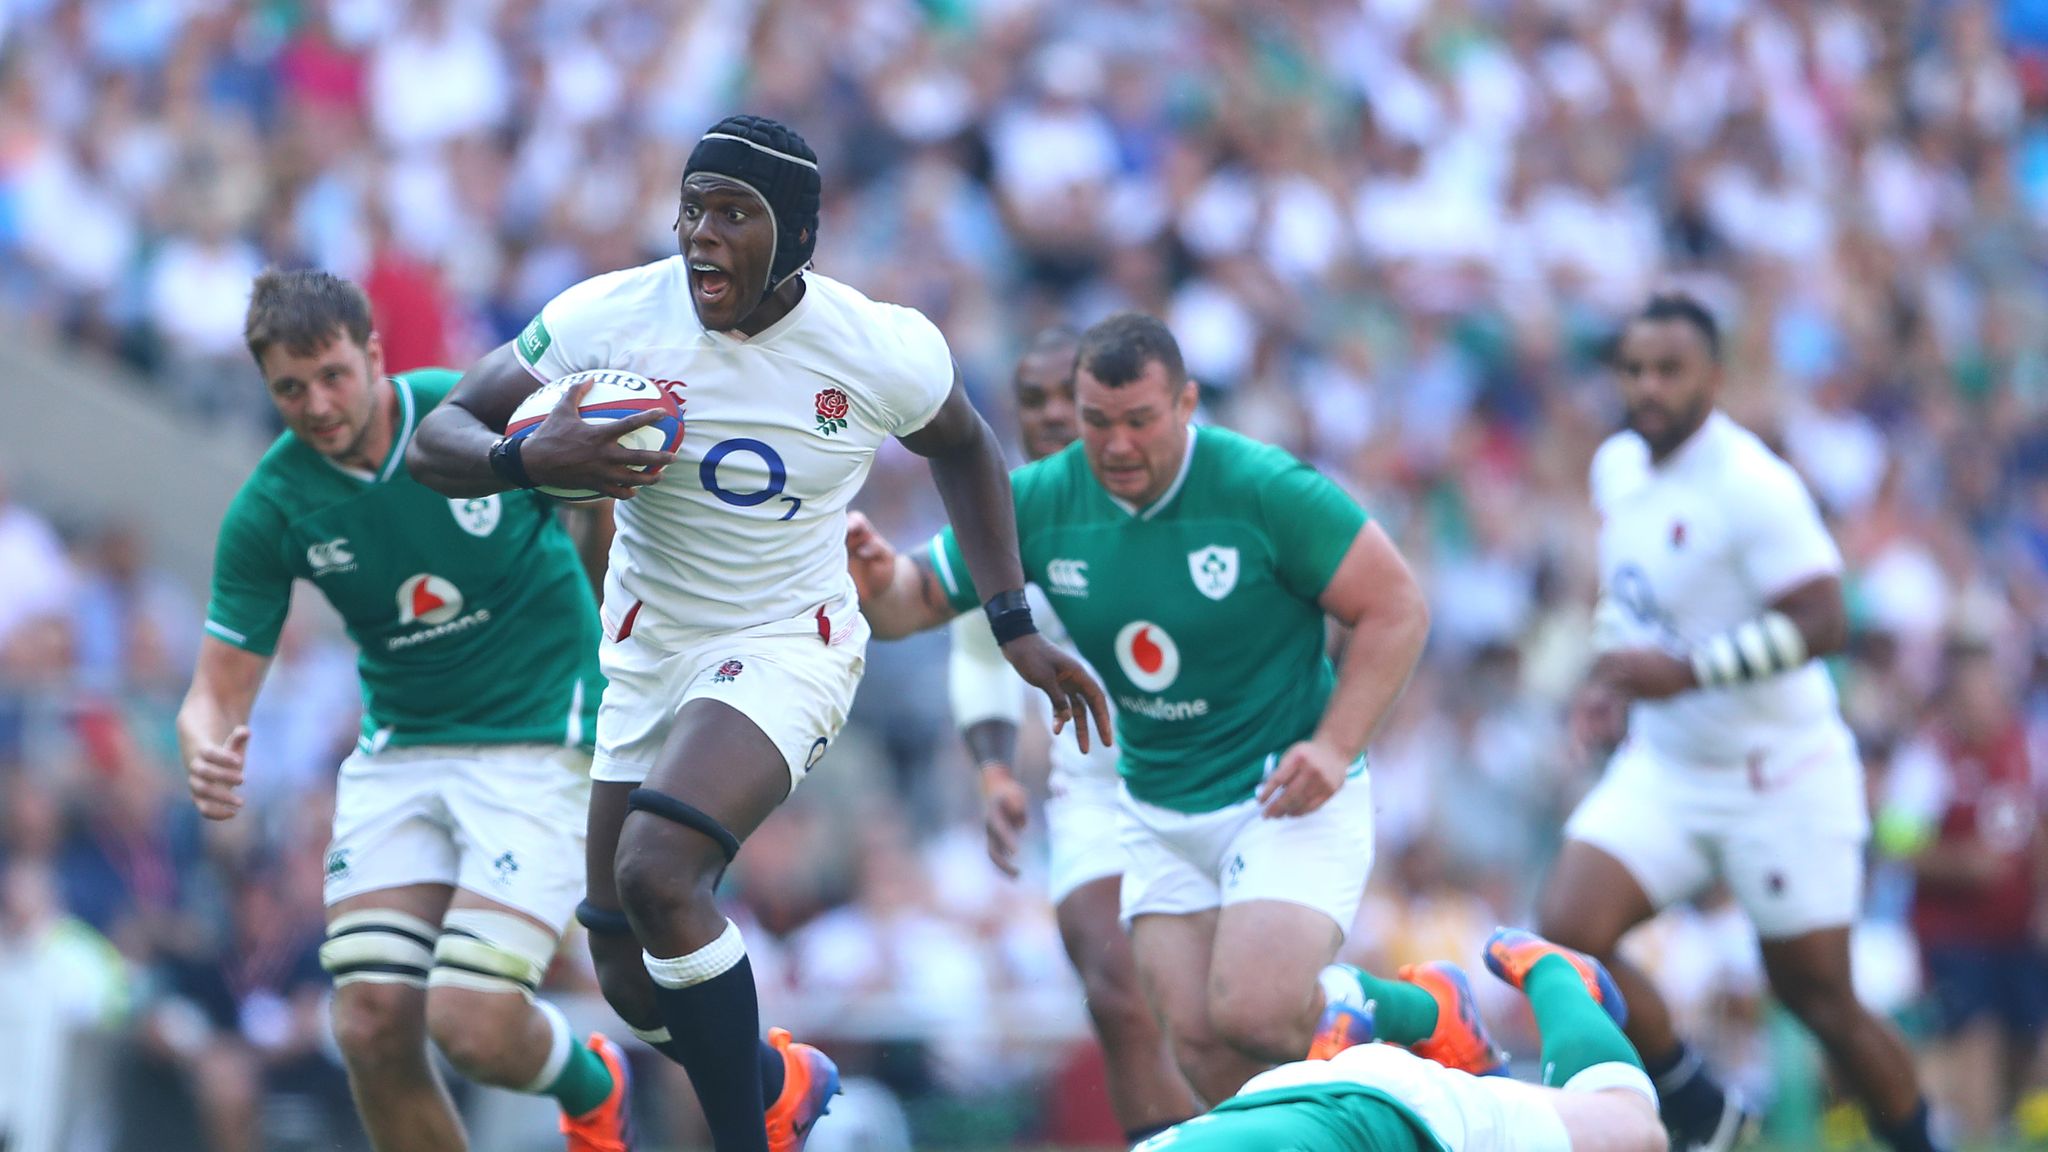 Maro Itoje on family, his England rugby teammates and Ralph Lauren